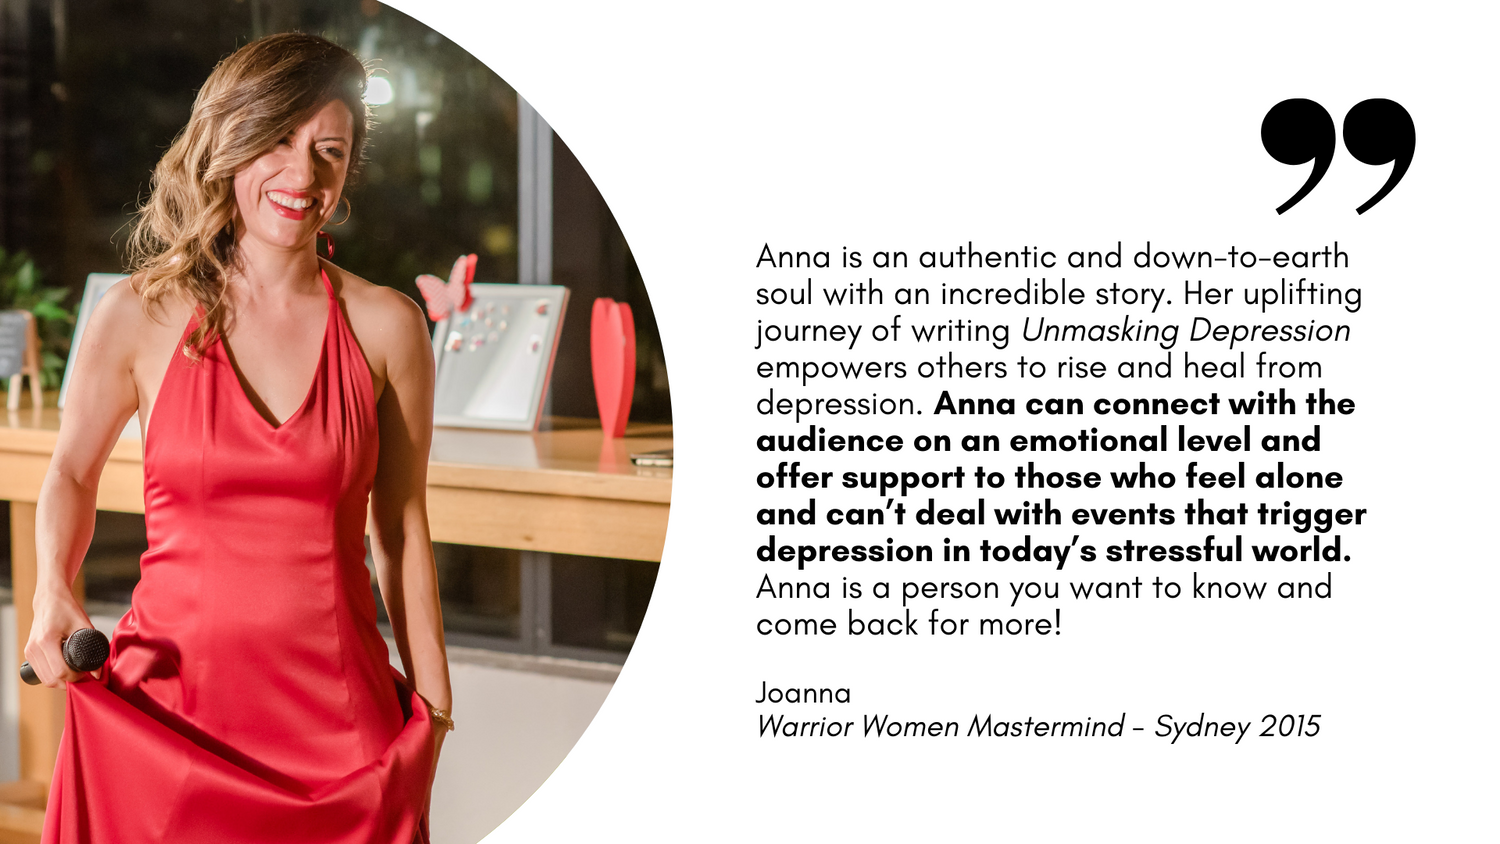 Joanna shares her review of Anna Krjatian's speech at the "Warrior Women Mastermind" event in Sydney. In the image Anna is holding up her red gown and a microphone in one hand, smiling at the audience.